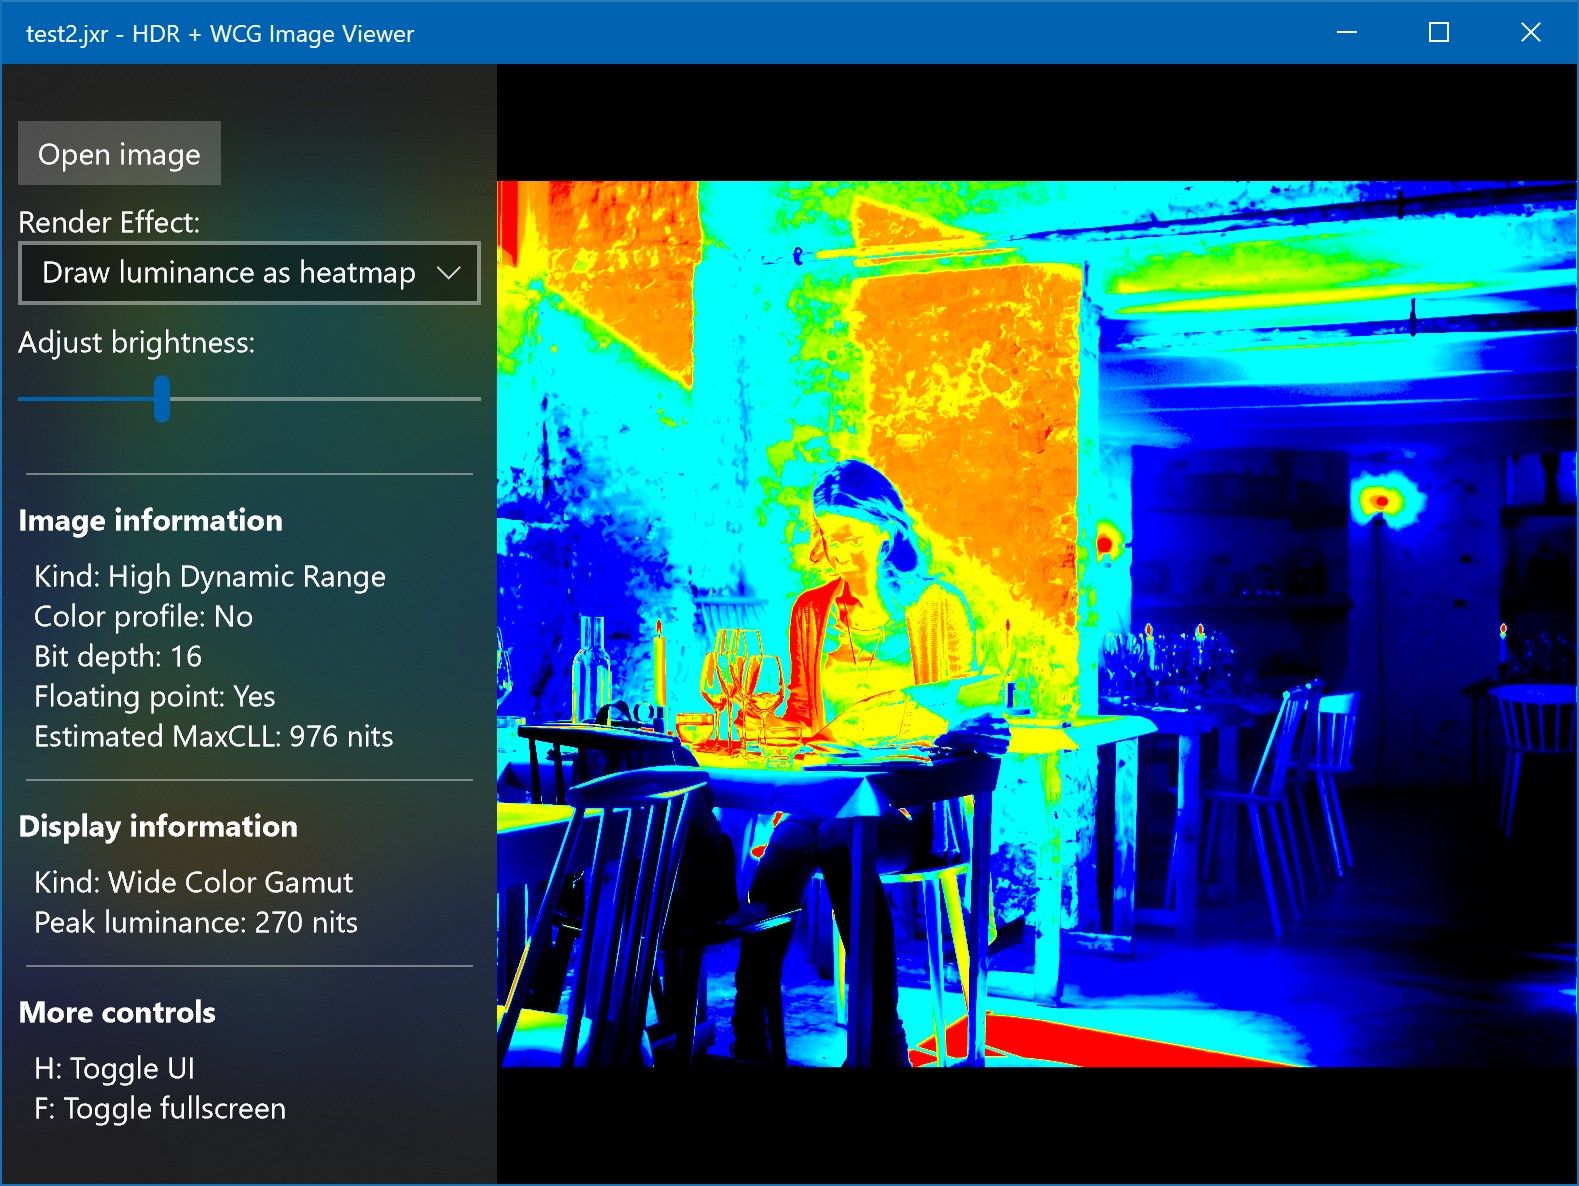 Render images with useful developer tools such as converting luminance to a color heatmap